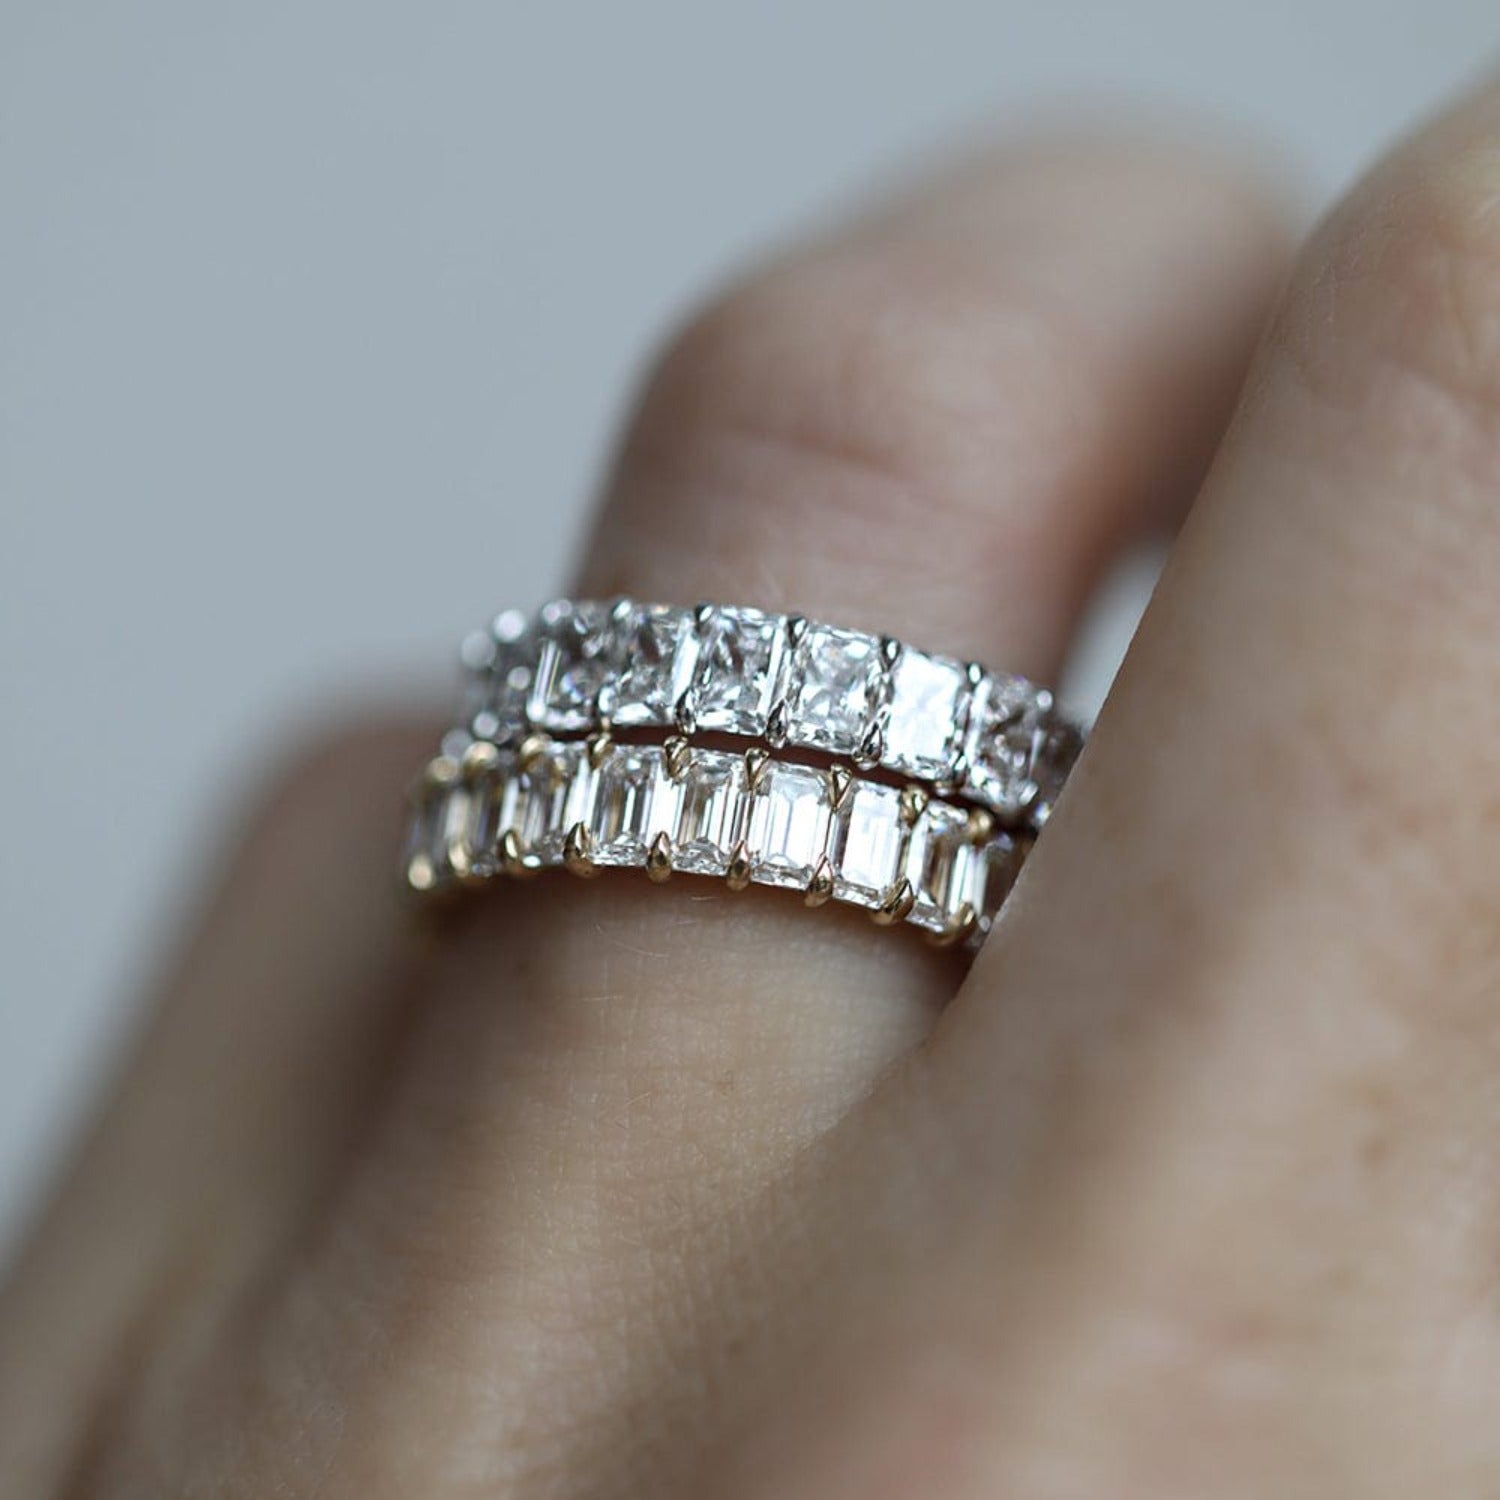 Stuck deciding which engagement ring combo I want.. opinions please! |  PurseForum